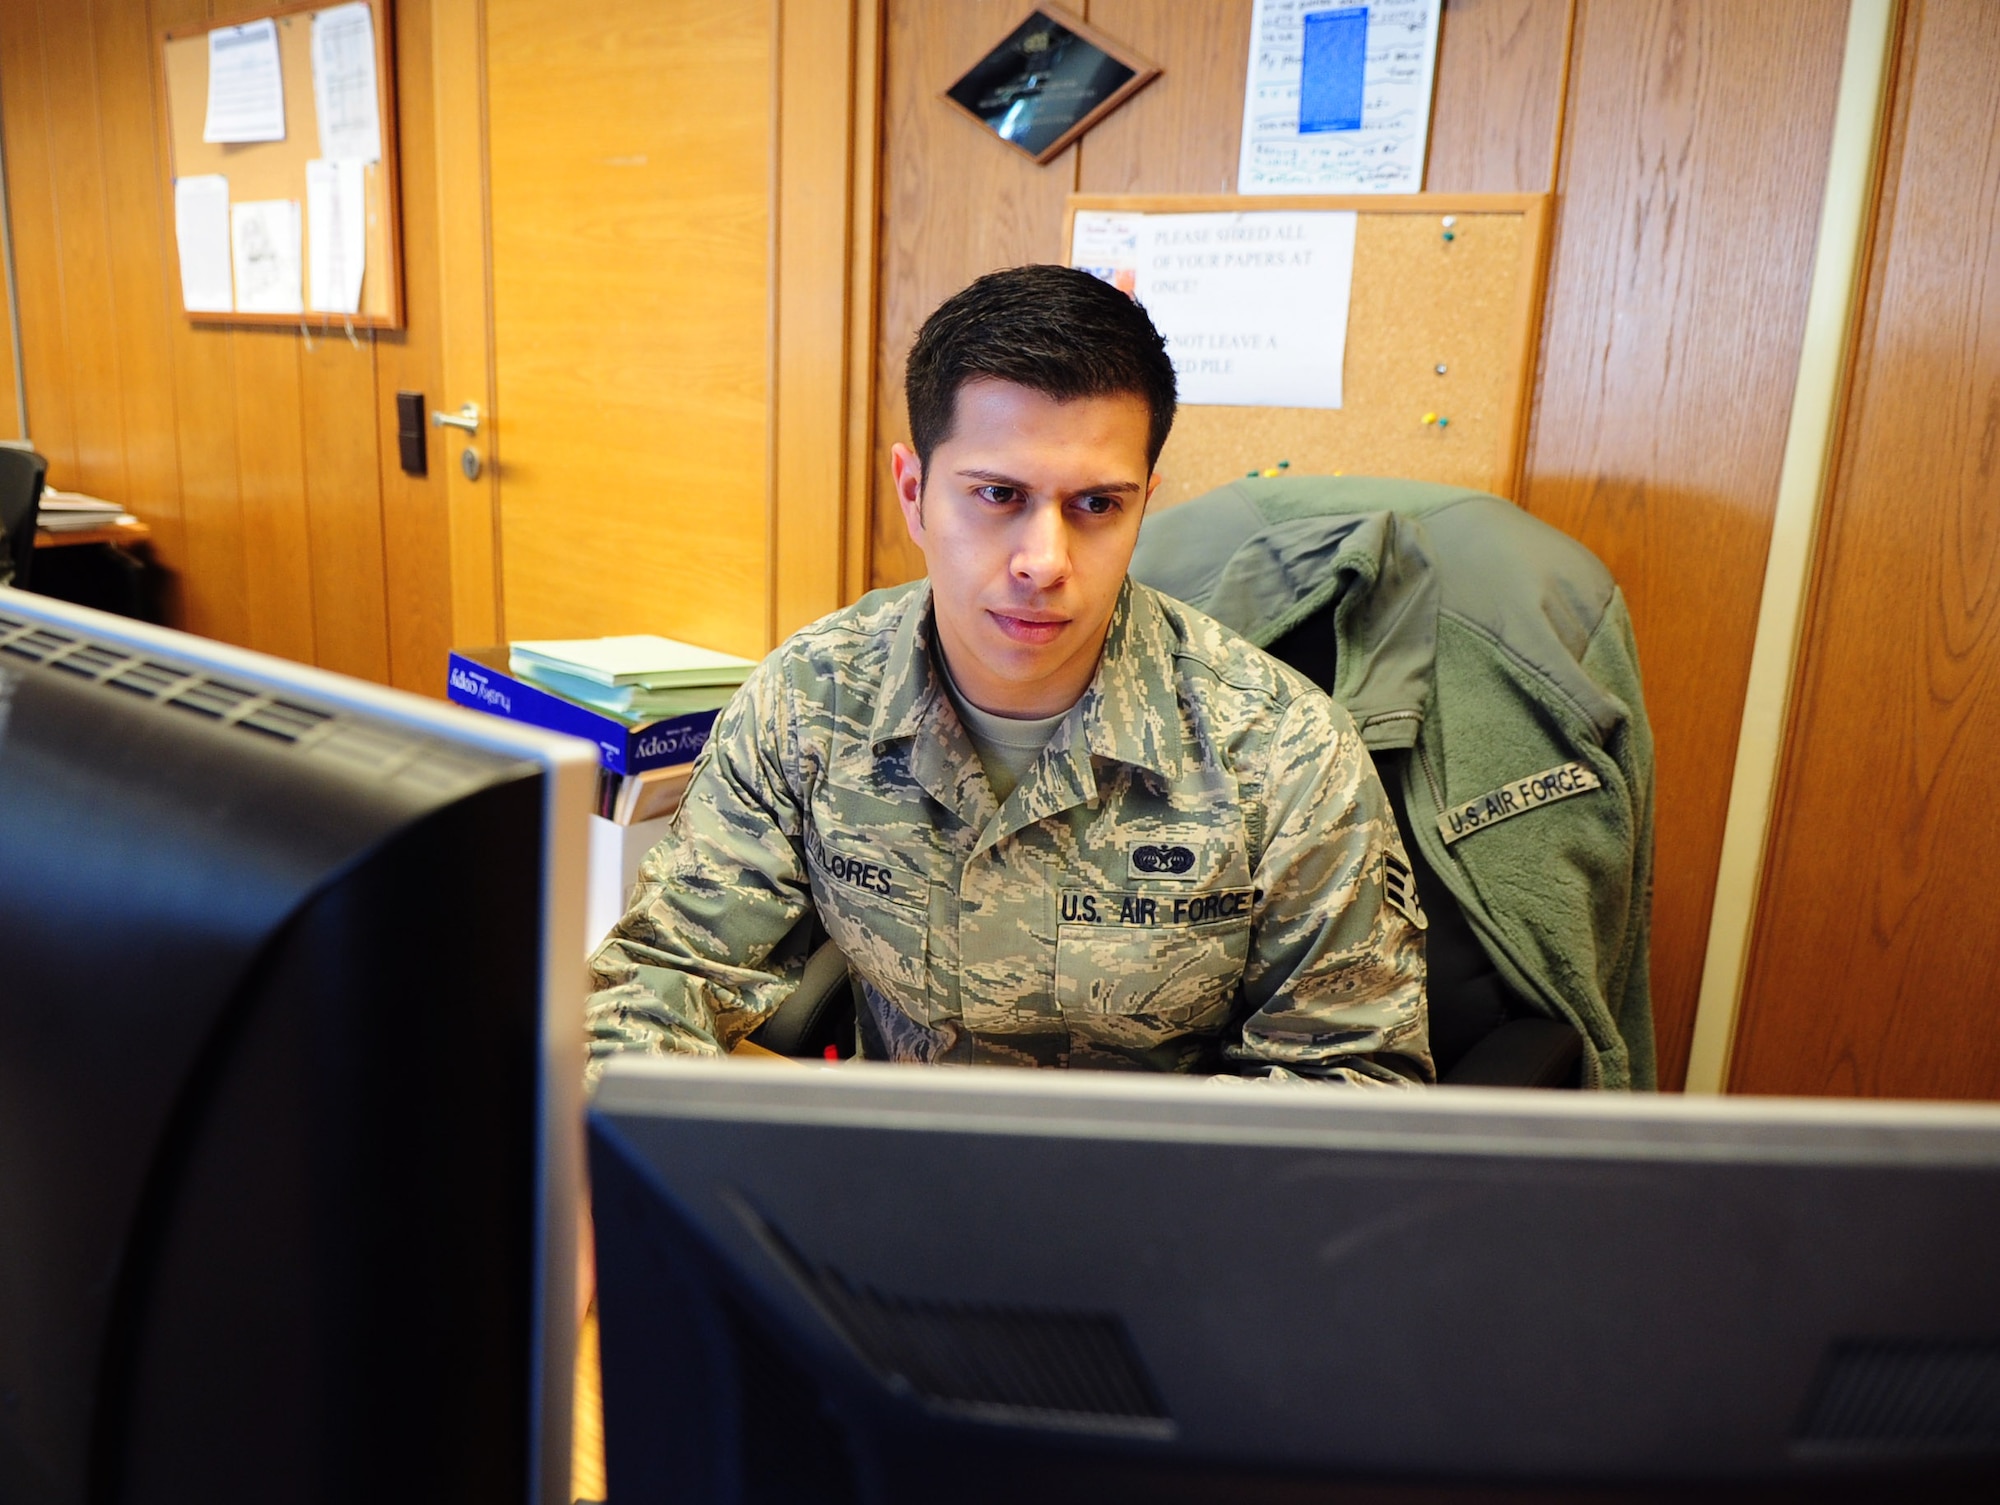 Senior Airman Jared Flores, 86th Airlift Wing paralegal, completes his portion of the legal process, Law Center, Ramstein Air Base, Germany, March 20, 2012. Members at the Law Center strive to provide on-time, on-target legal advice and services to the Kaiserslautern Military Community. (U.S. Air Force photo by Senior Airman Brittany Perry)